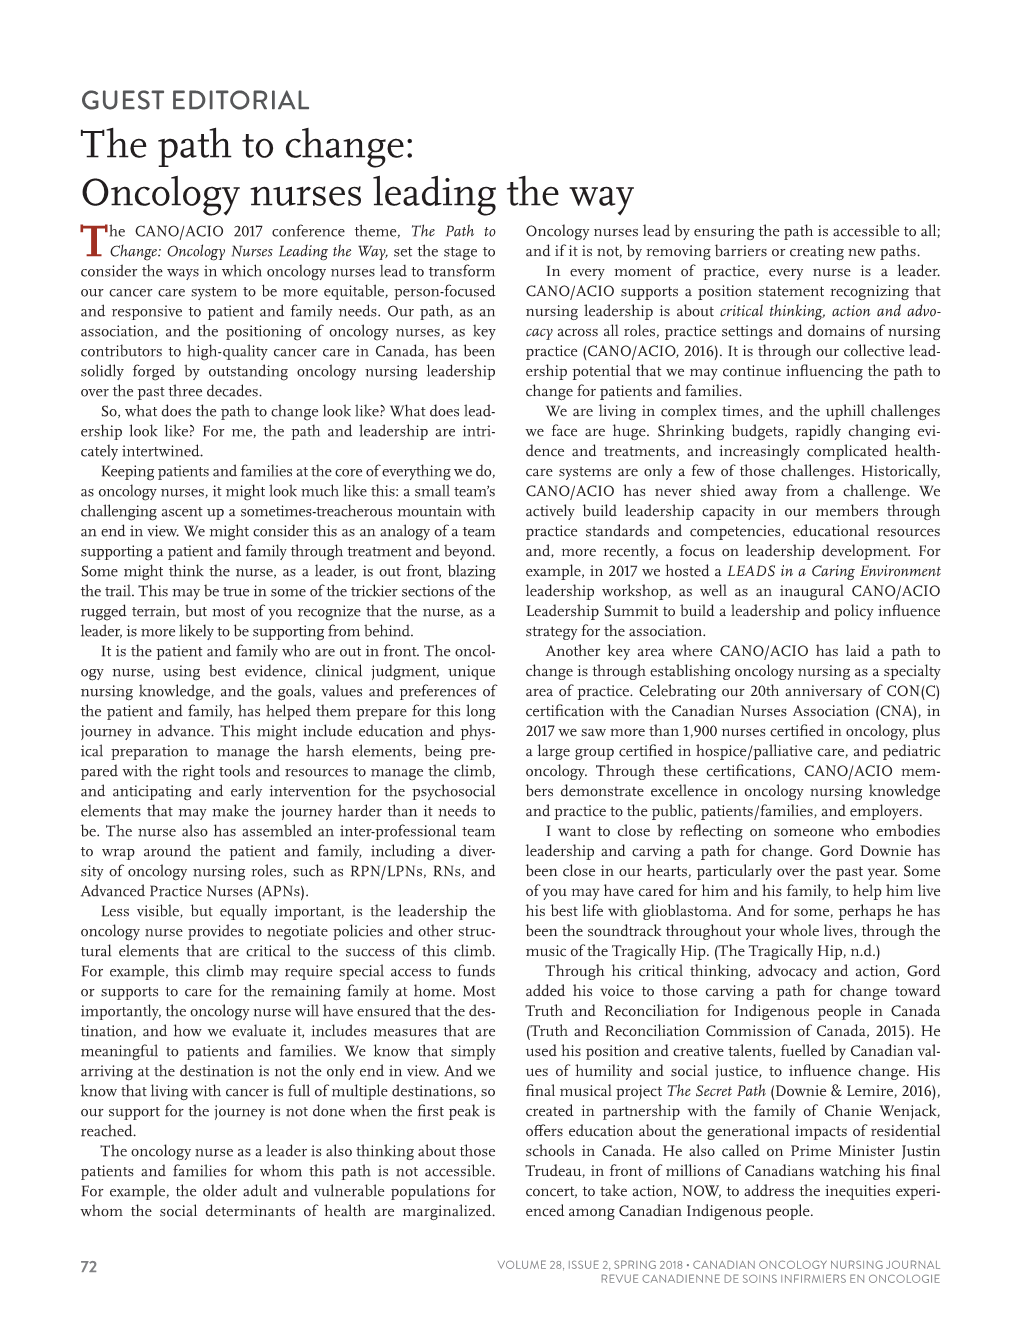 The Path to Change: Oncology Nurses Leading The